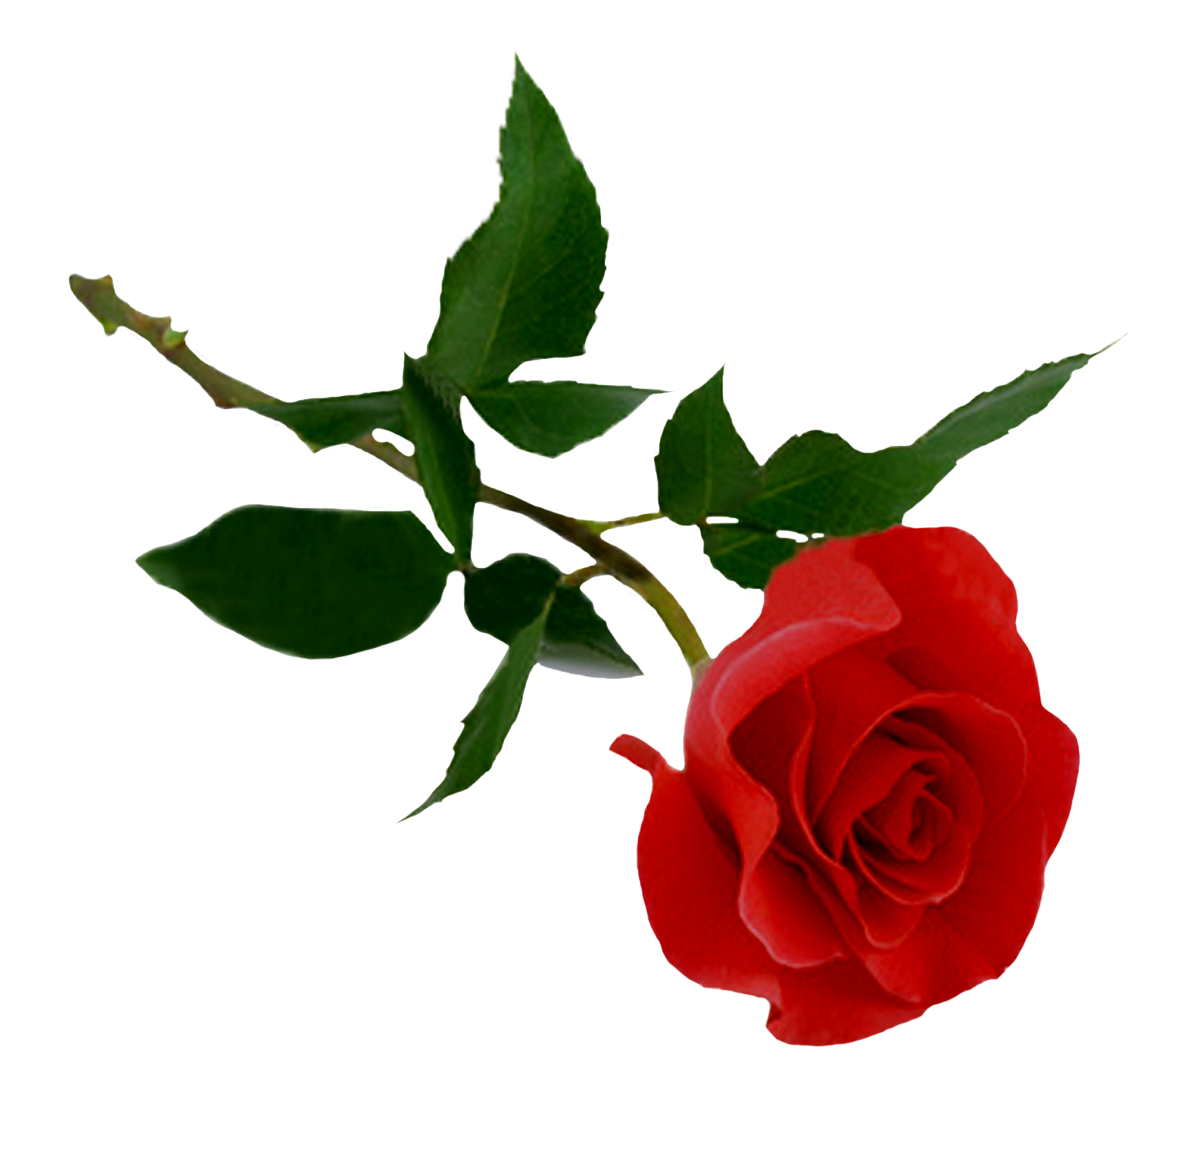 Red Rose PNG HD